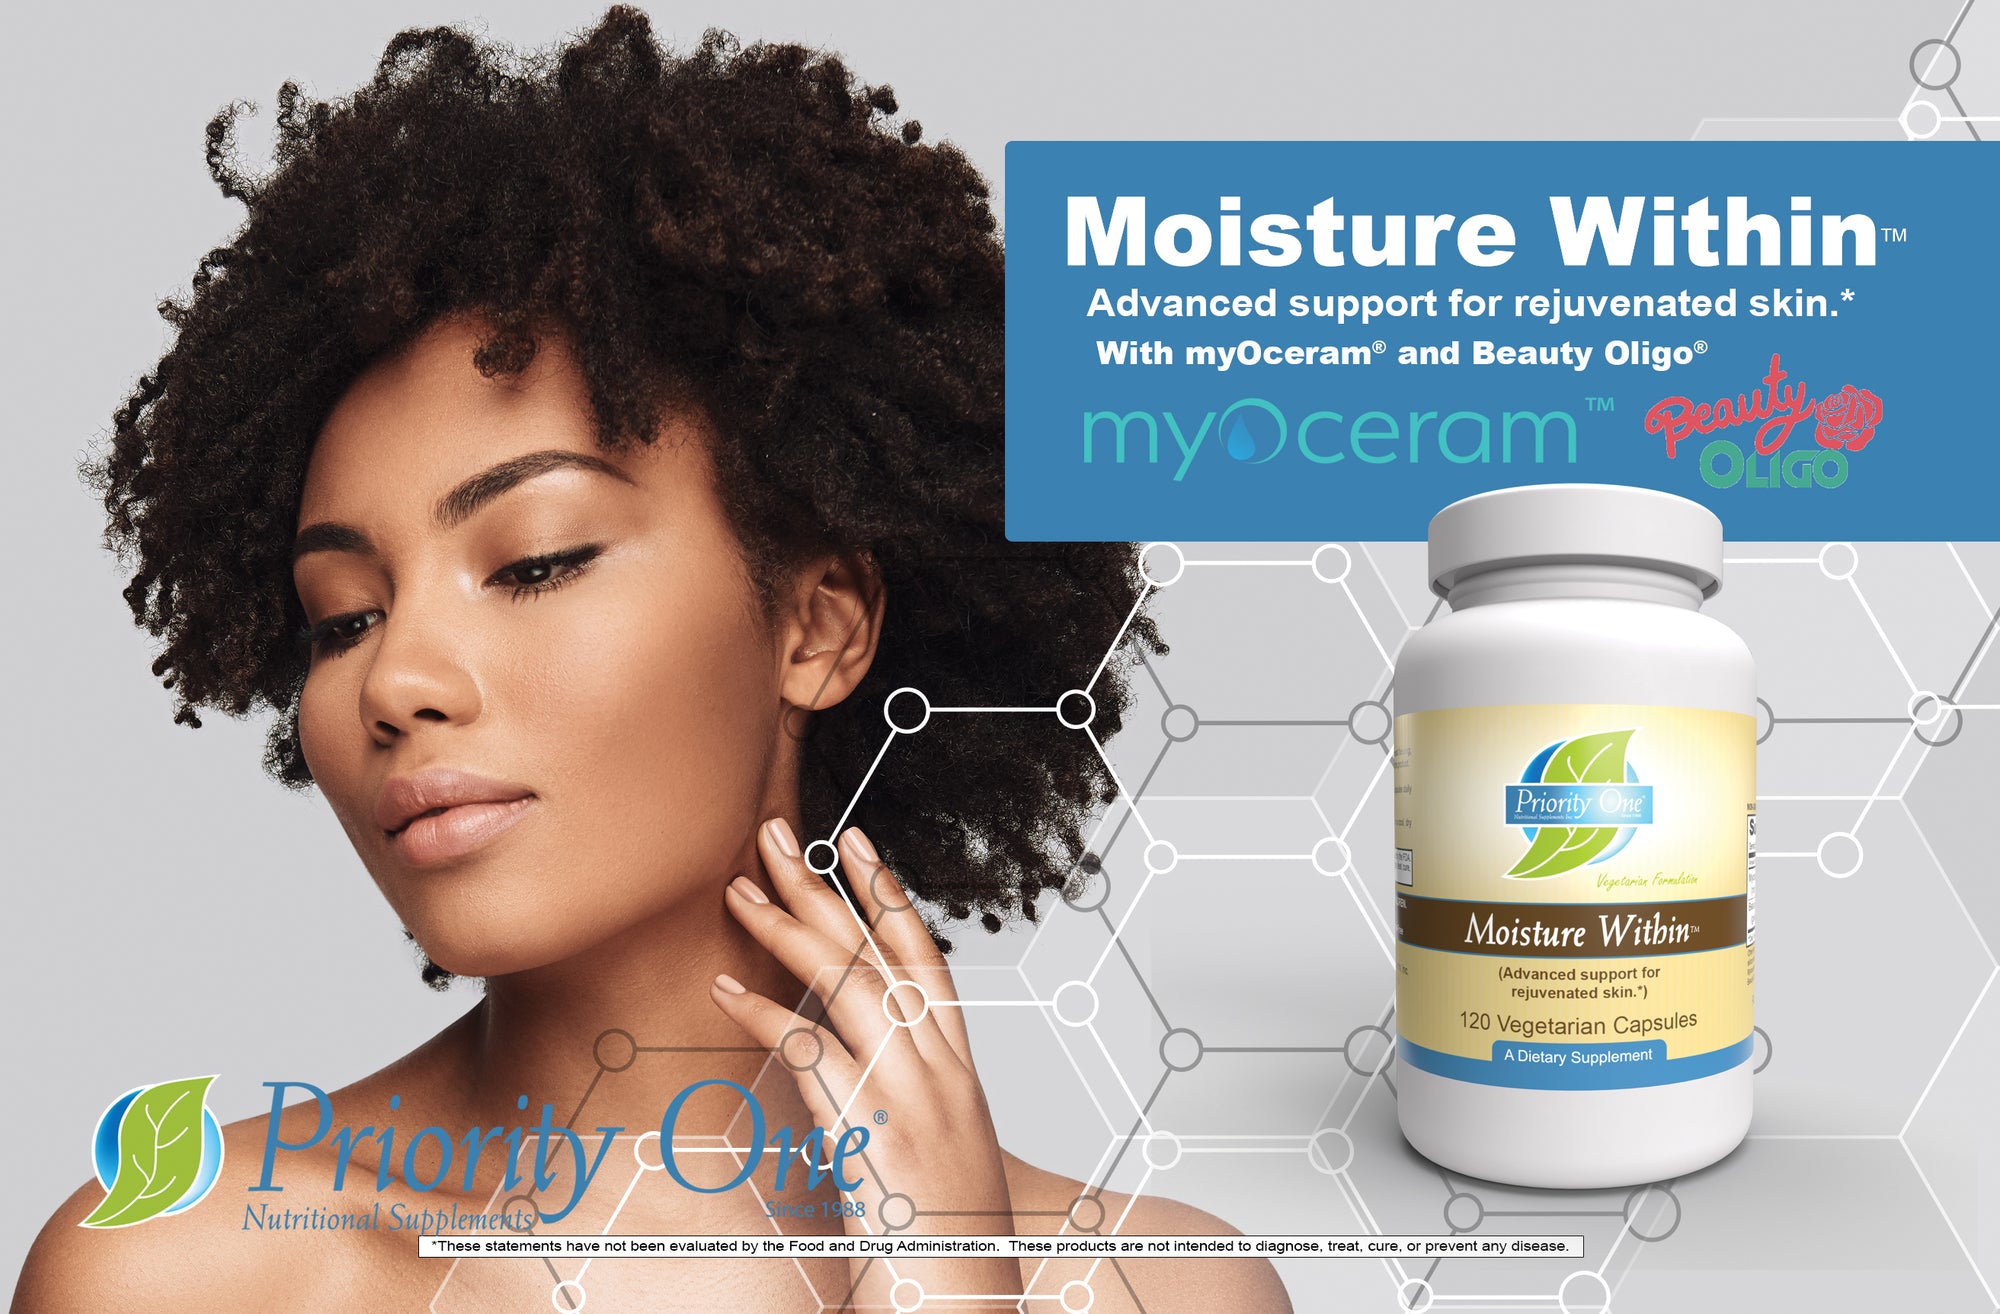 Moisture Within (120 Vegetarian Capsules) - A ceramide oral supplement that provides advanced support for rejuvenated wrinkle-free skin.*